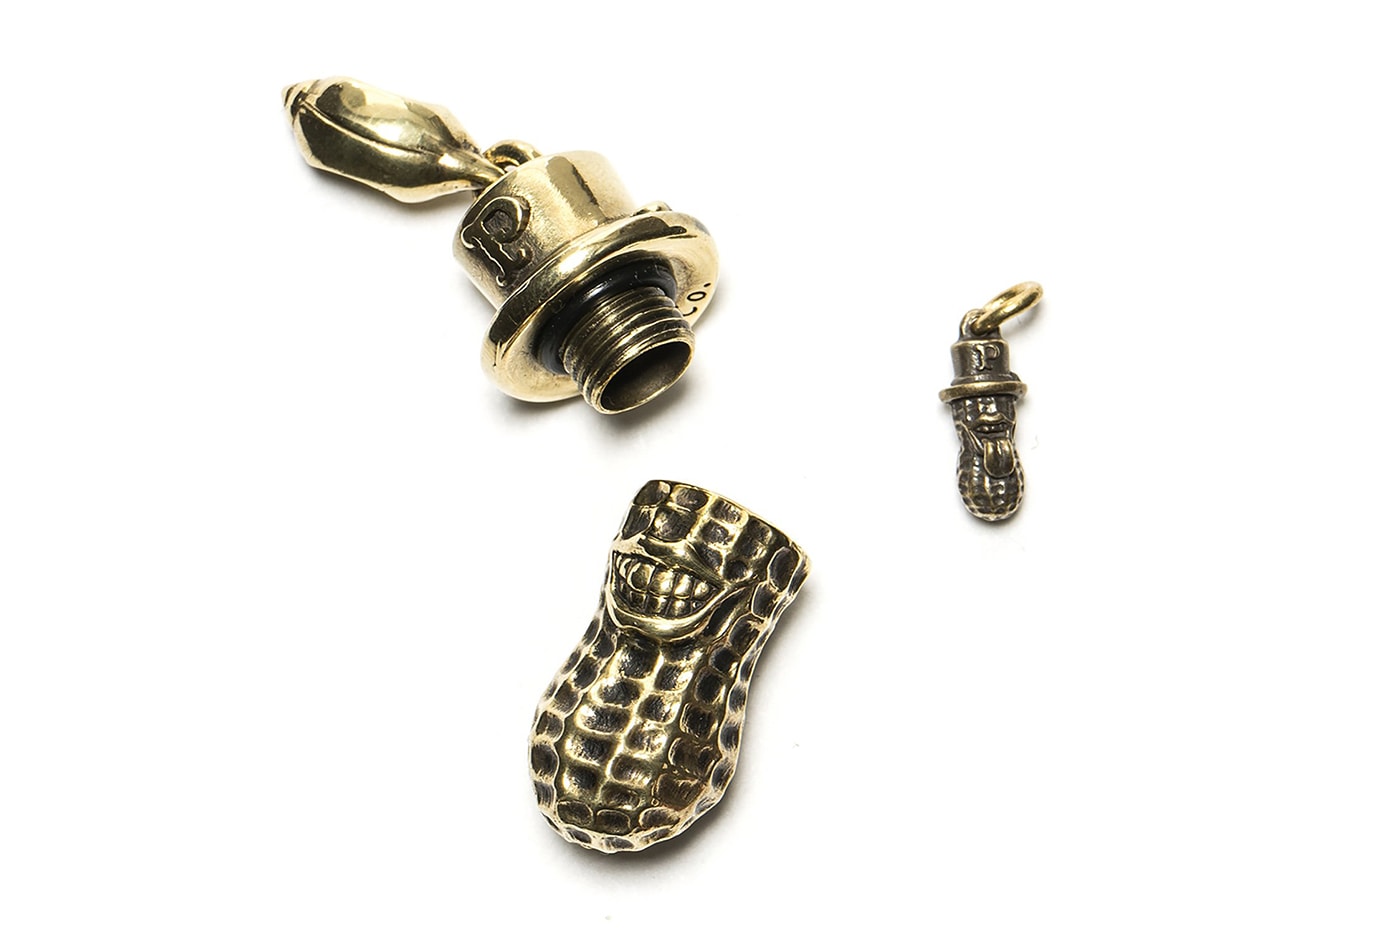 Peanuts & Co. Accessories rings necklaces pins pendants chains release info